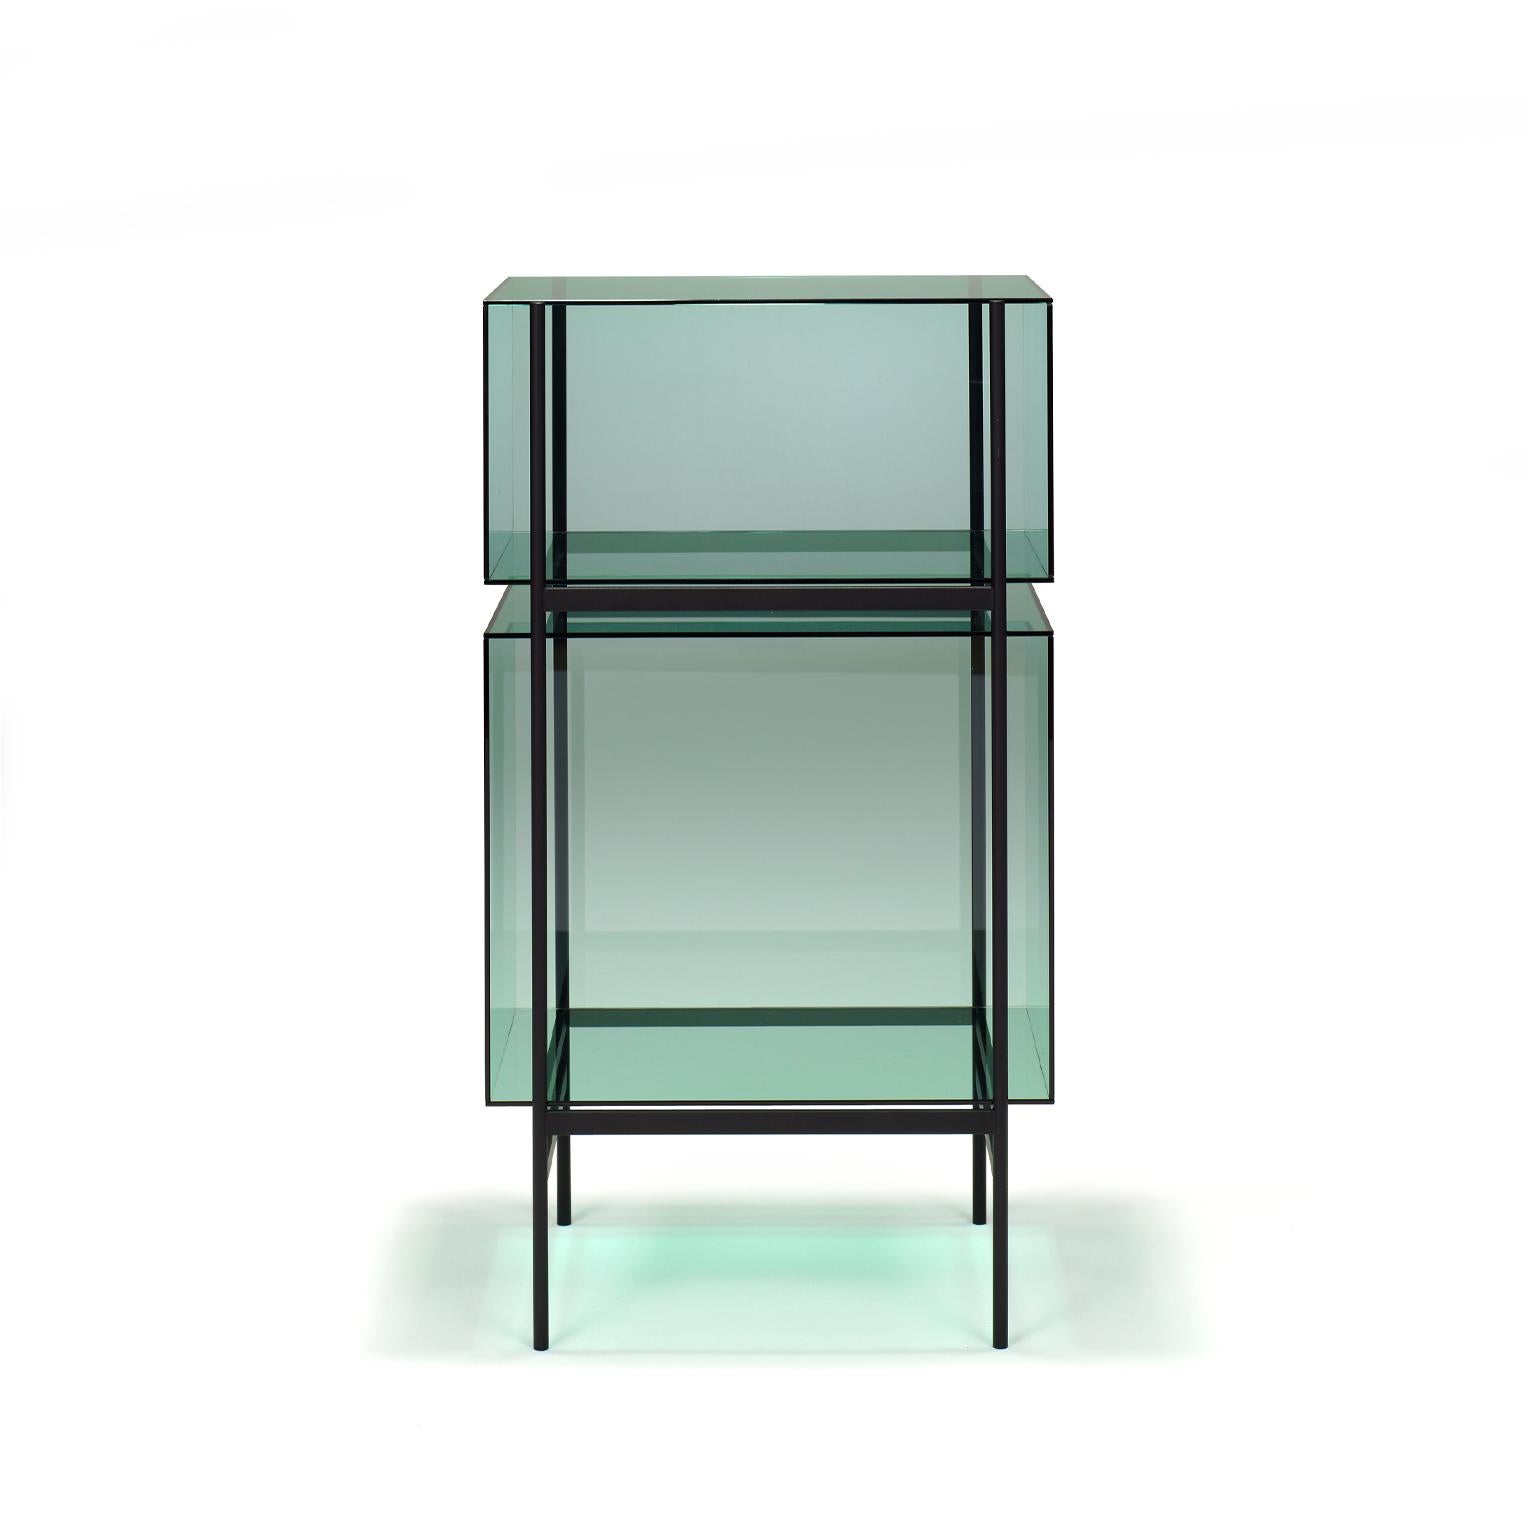 Lyn cabinet, European, Minimalist, green, black base, German, cabinet, 21st century, small size

Studio Visser & Meijwaard describe their conception of lyn as a “graphic interplay between glass and the metal frameworks”. The doorless and diverse